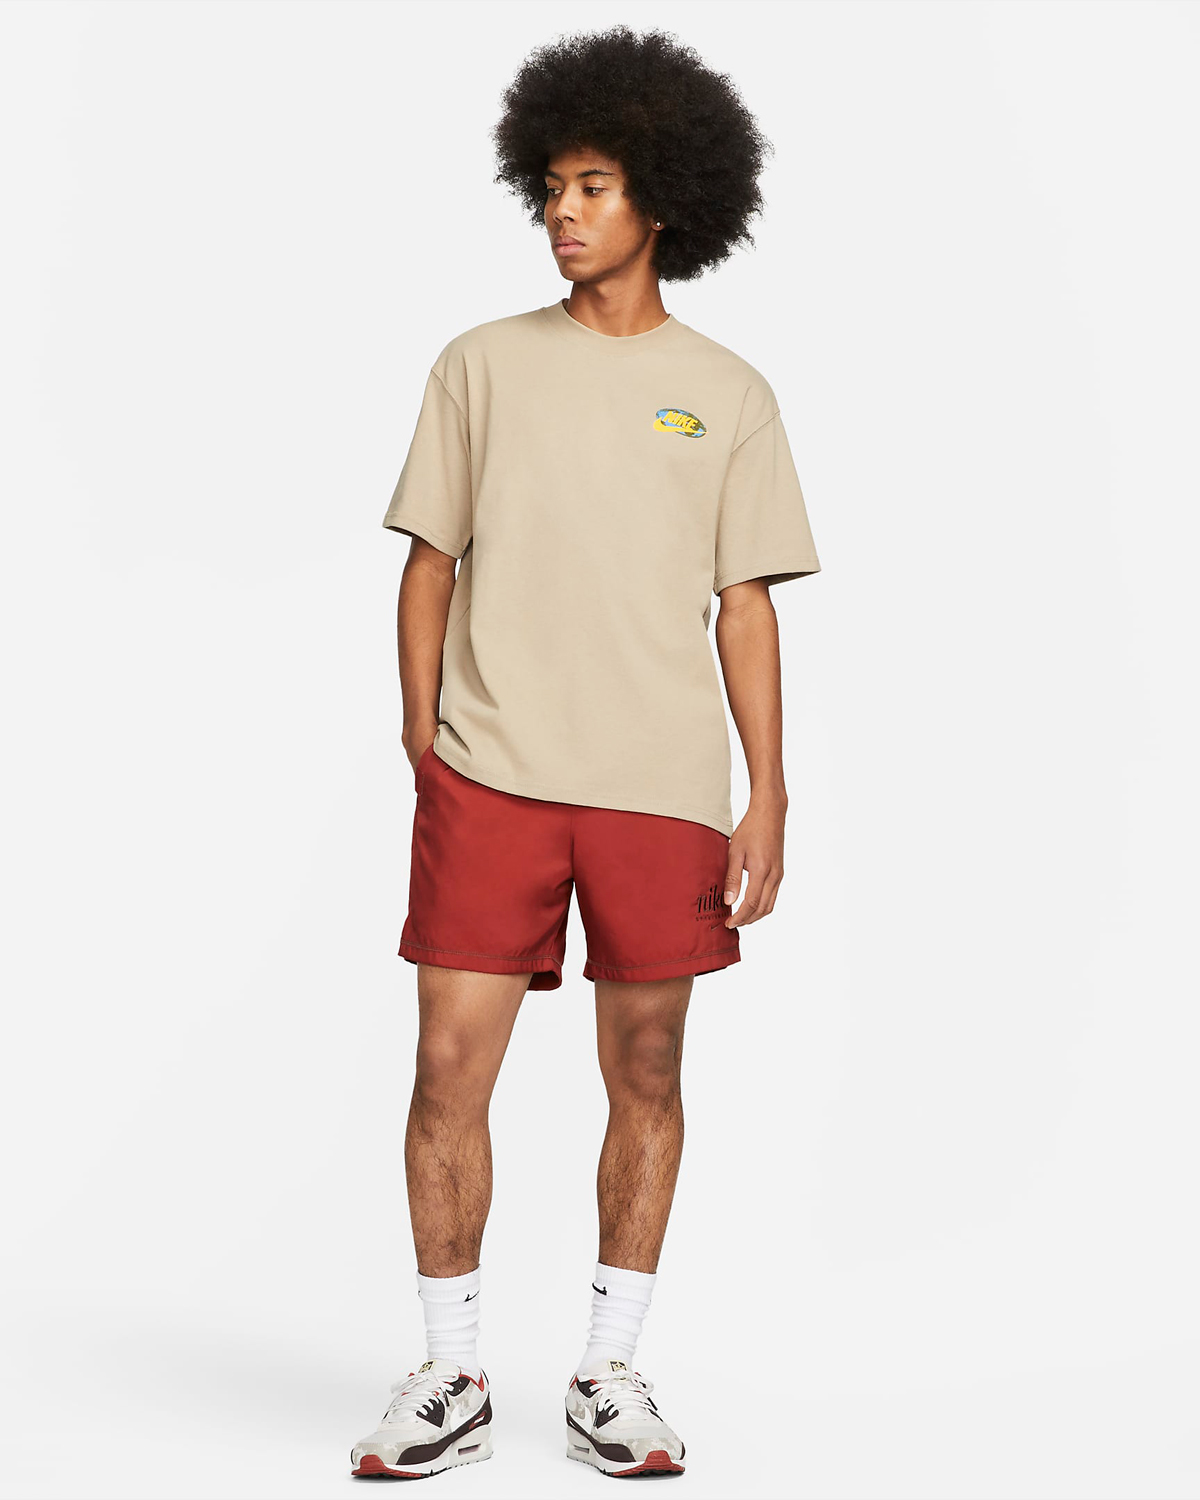 Nike-Sportswear-Play-It-Cool-for-Mother-Earth-T-Shirt-Khaki-Outfit